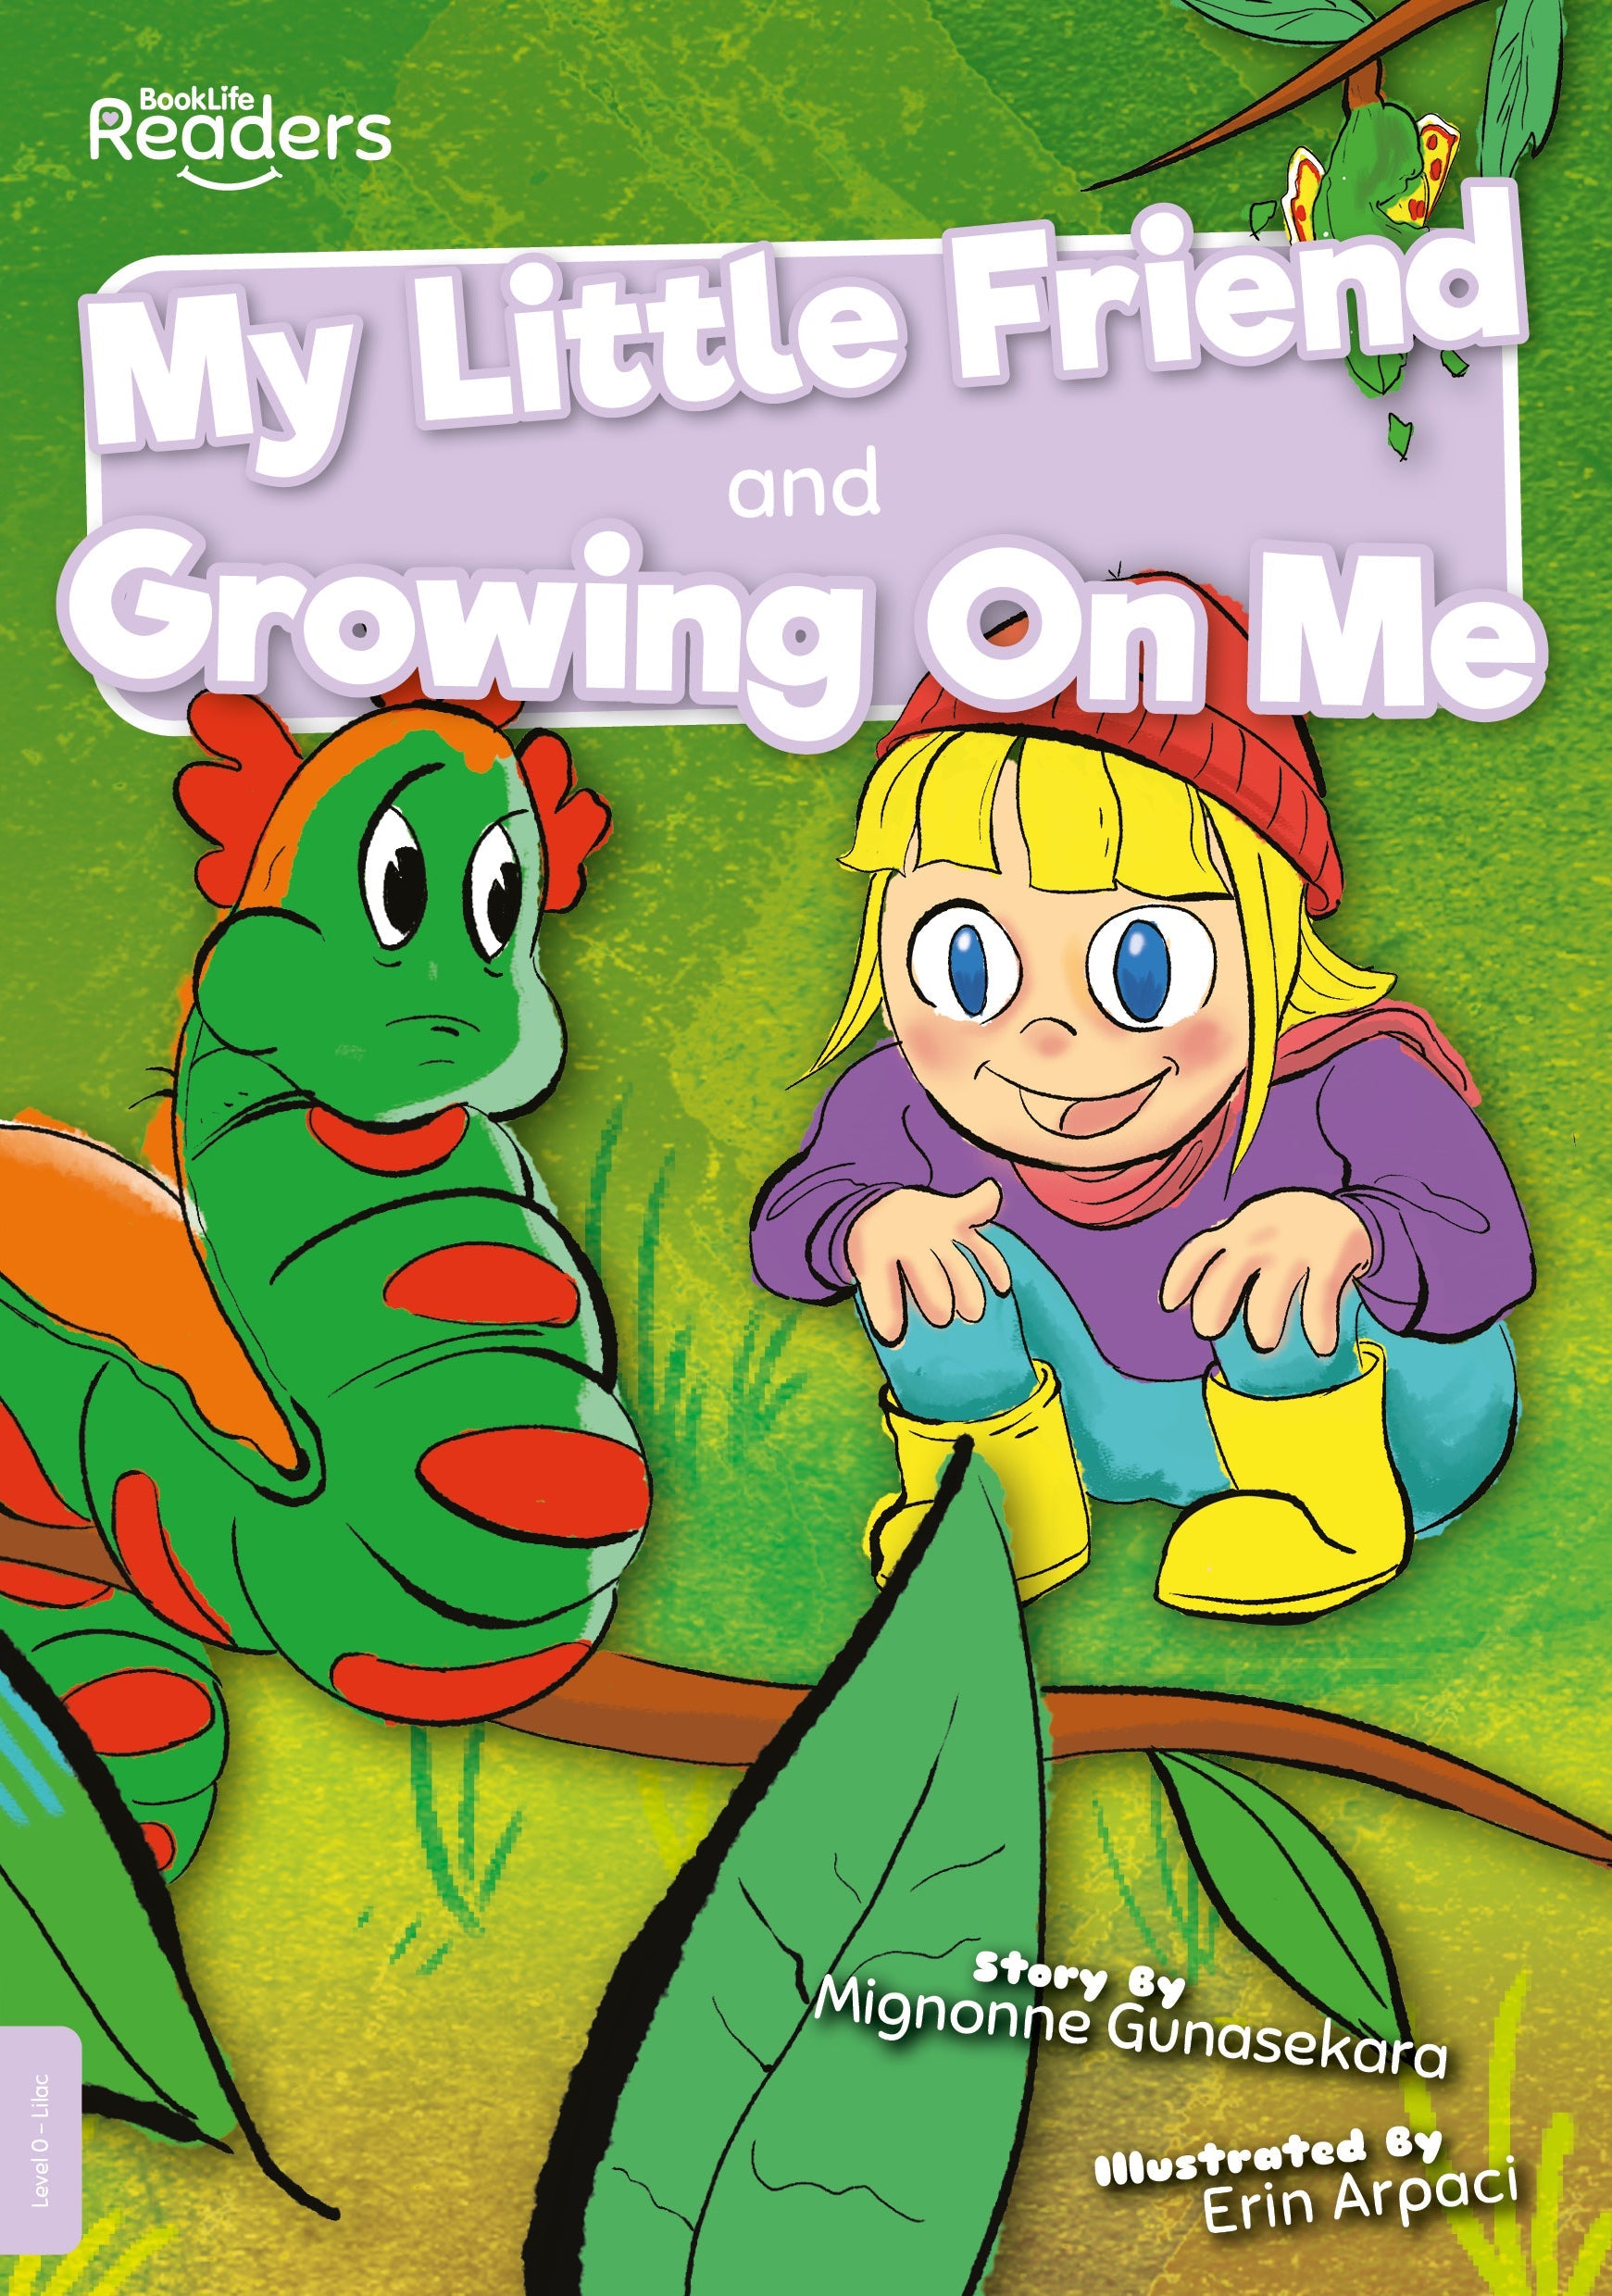 BookLife Readers: Level 0–11 Lilac to Lime Book Bands.  Letters and Sounds Phases 1–6 (166 Books)